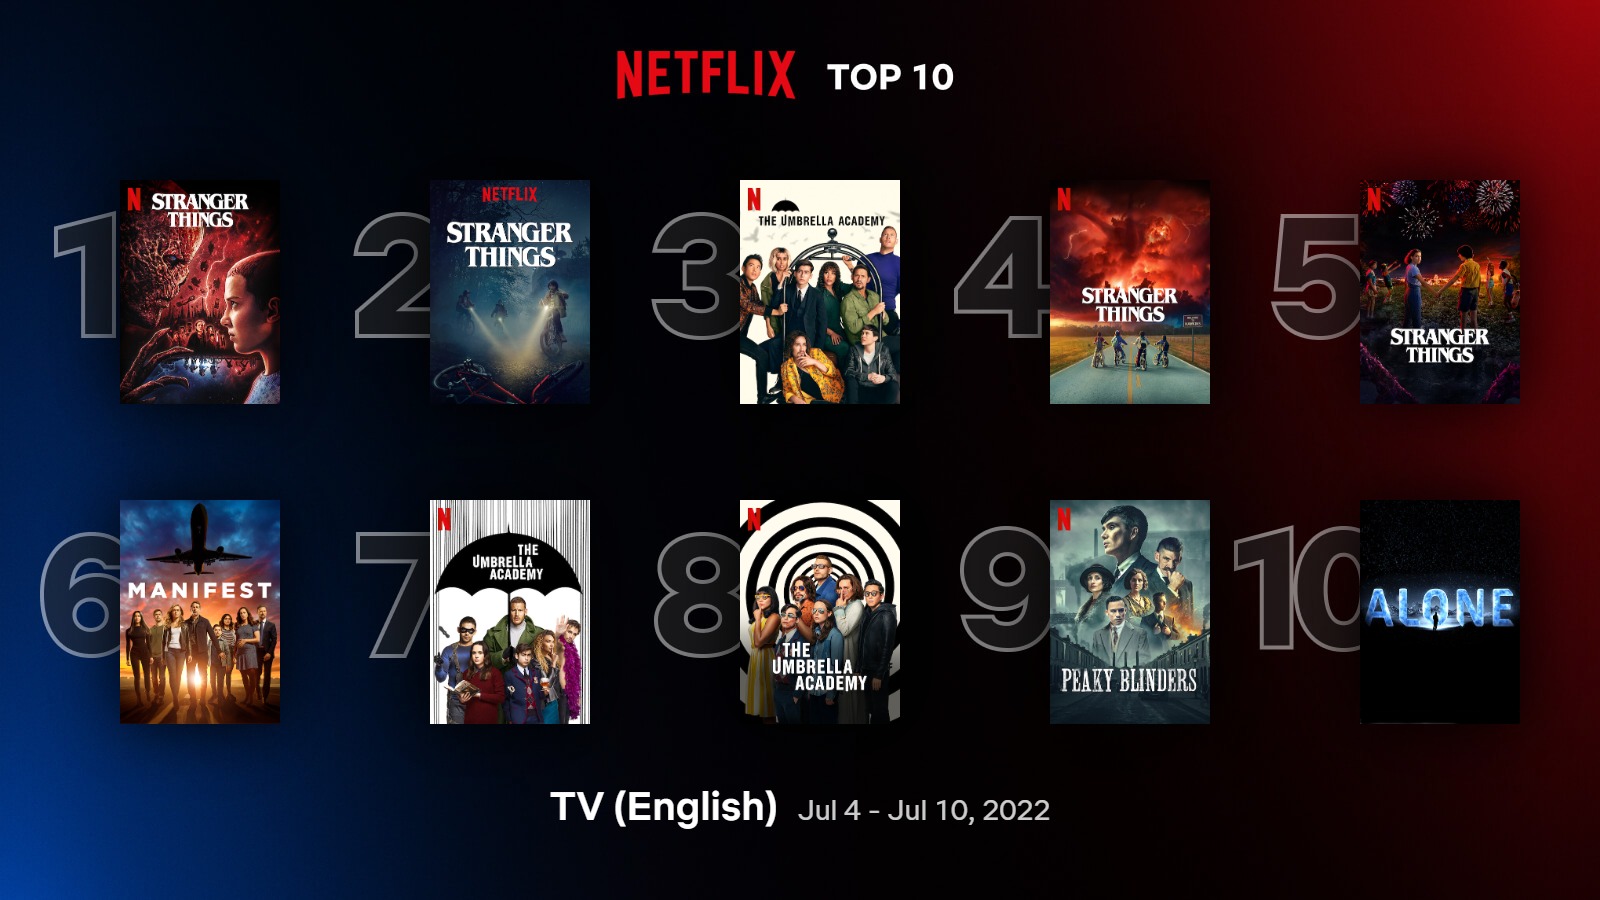 Netflix most watched series